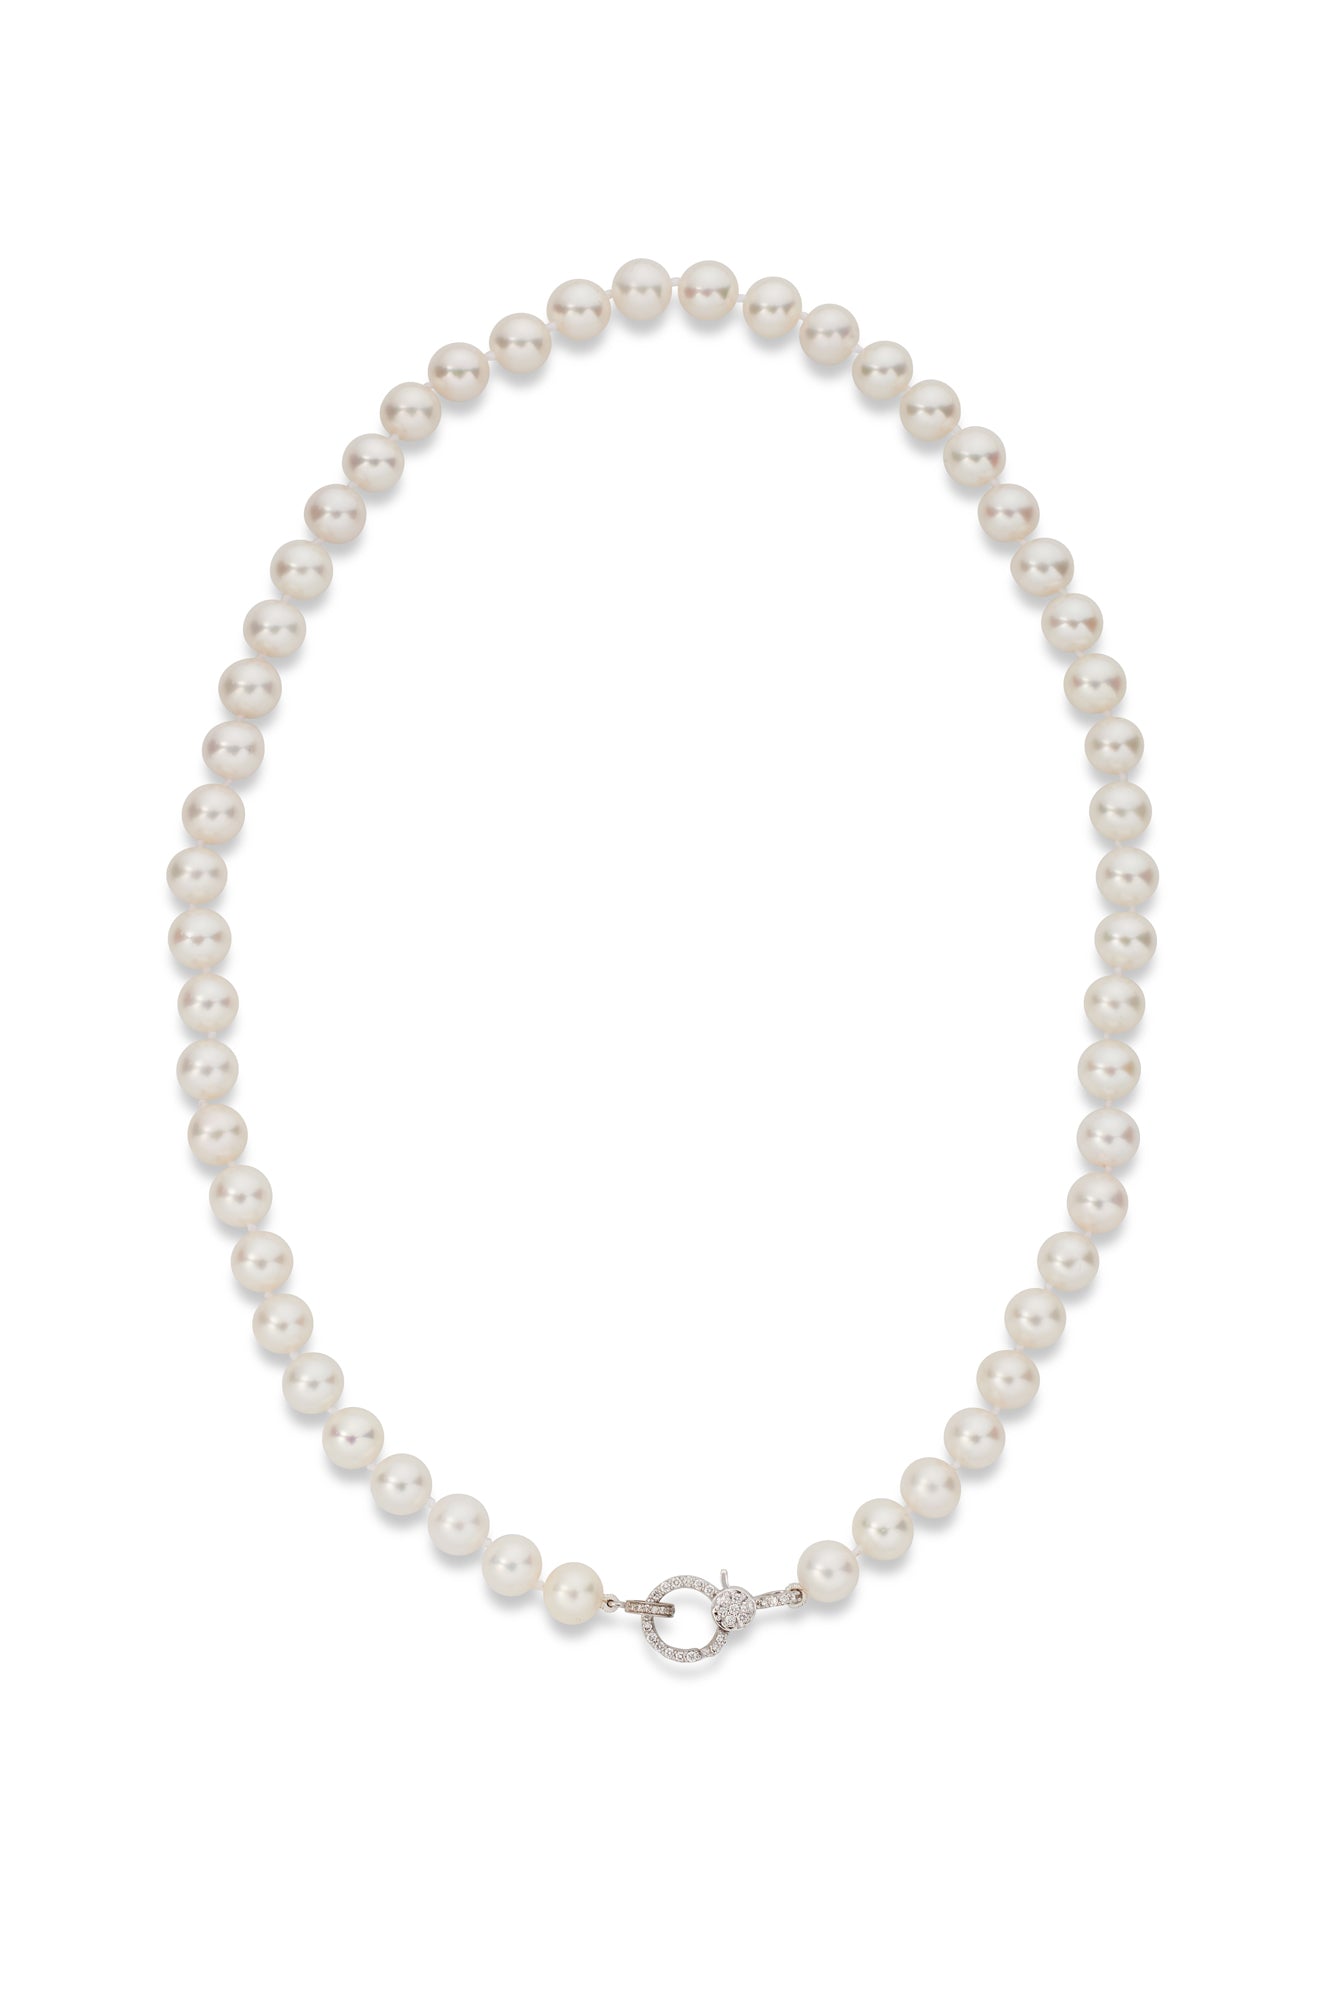 Pearl Strand Necklace with 14K White Gold Pave Clasp